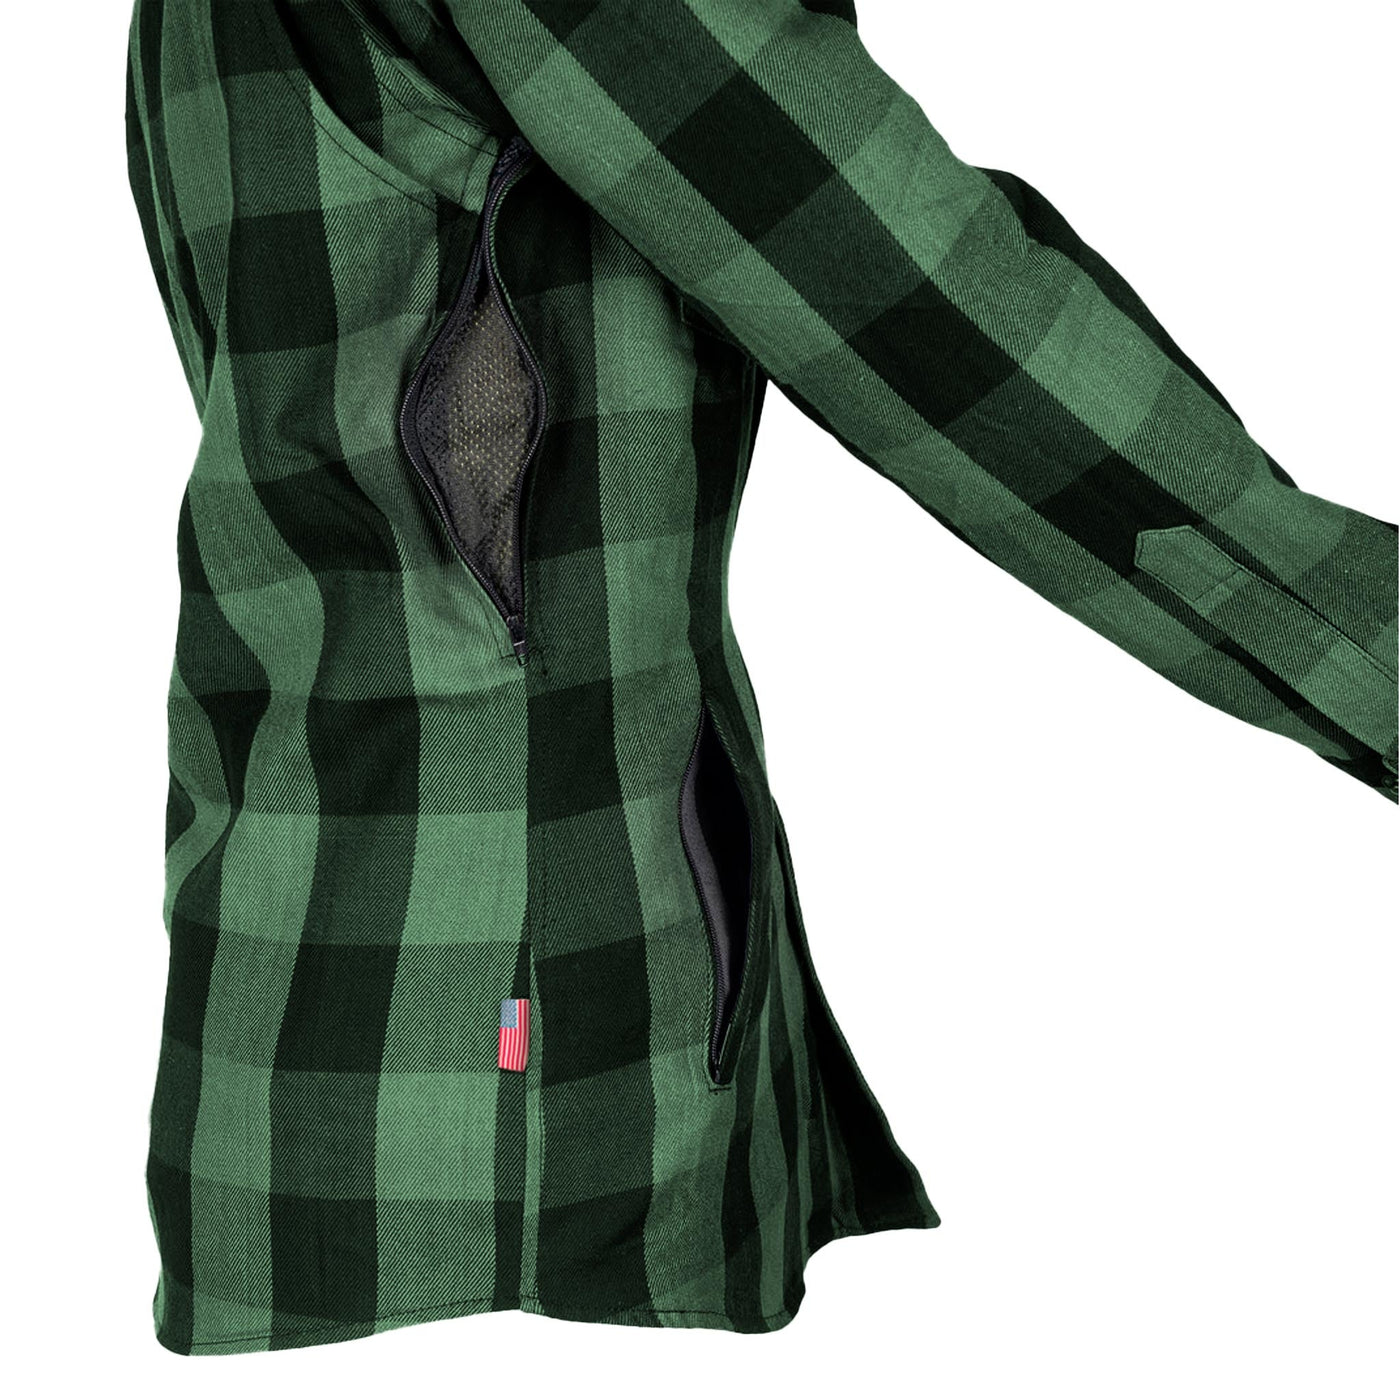 Protective Flannel Shirt with Pads for Women - Green Checkered